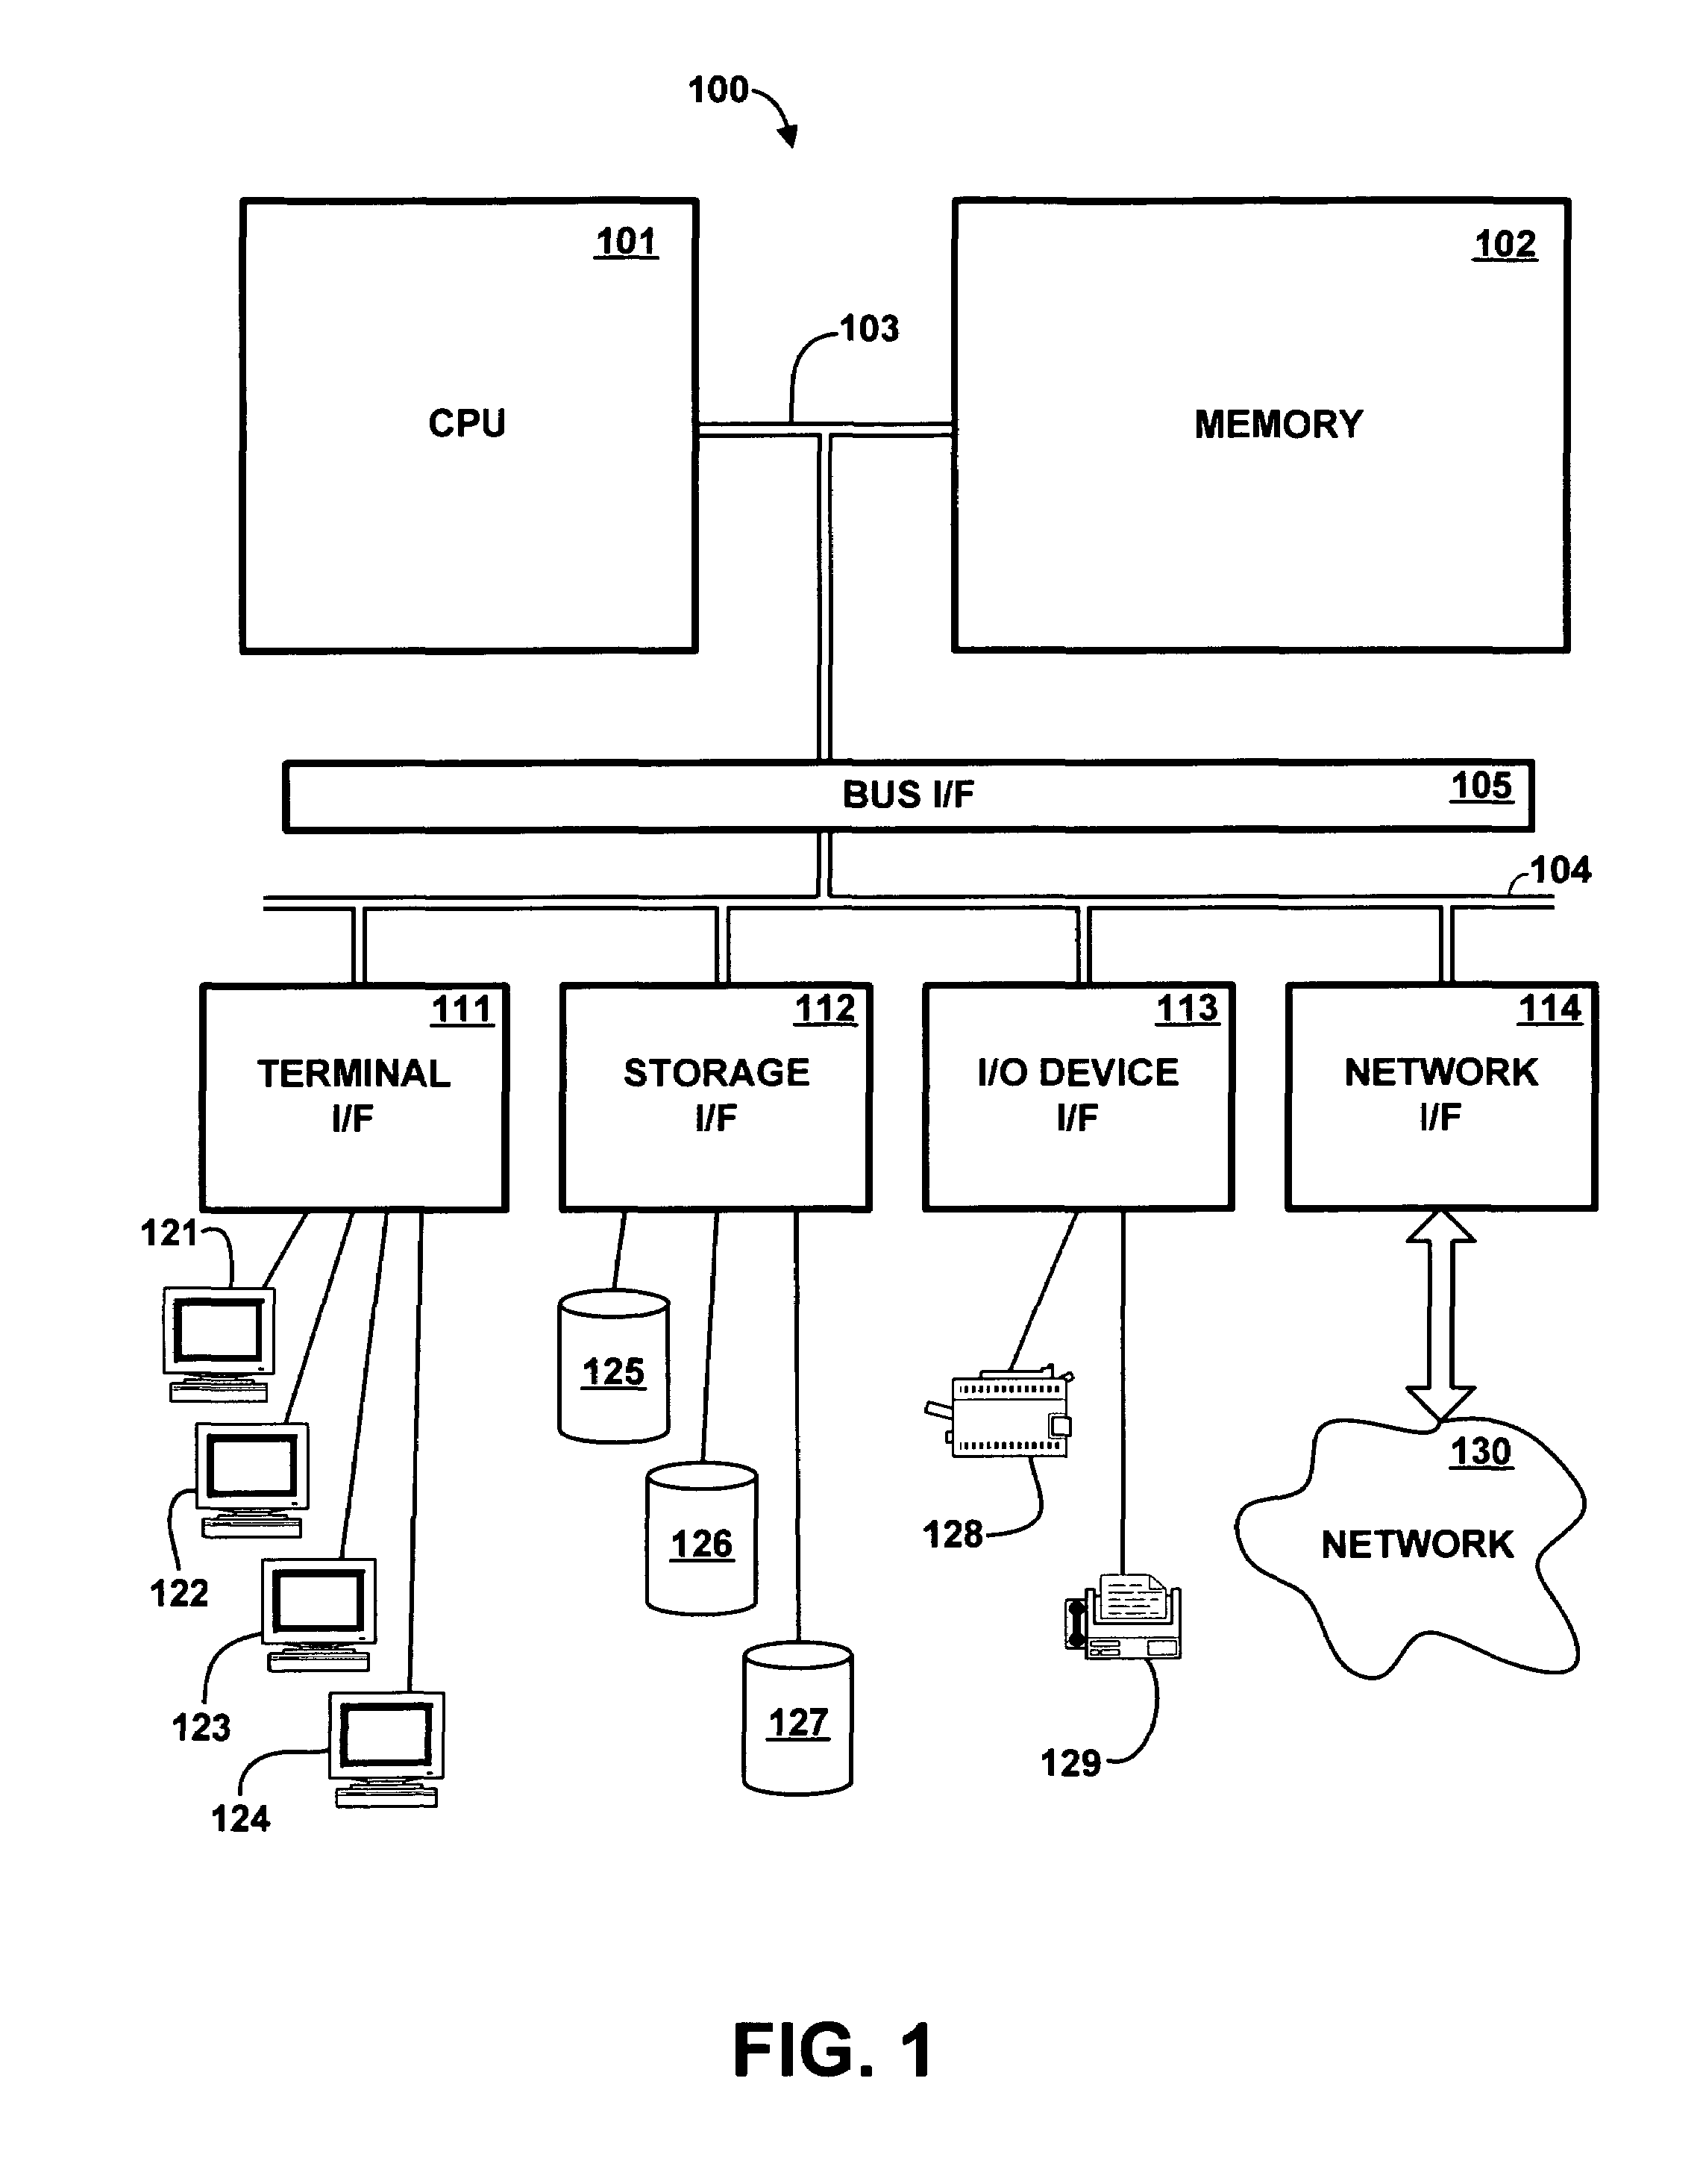 Method and apparatus for breakpoint analysis of computer programming code using unexpected code path conditions